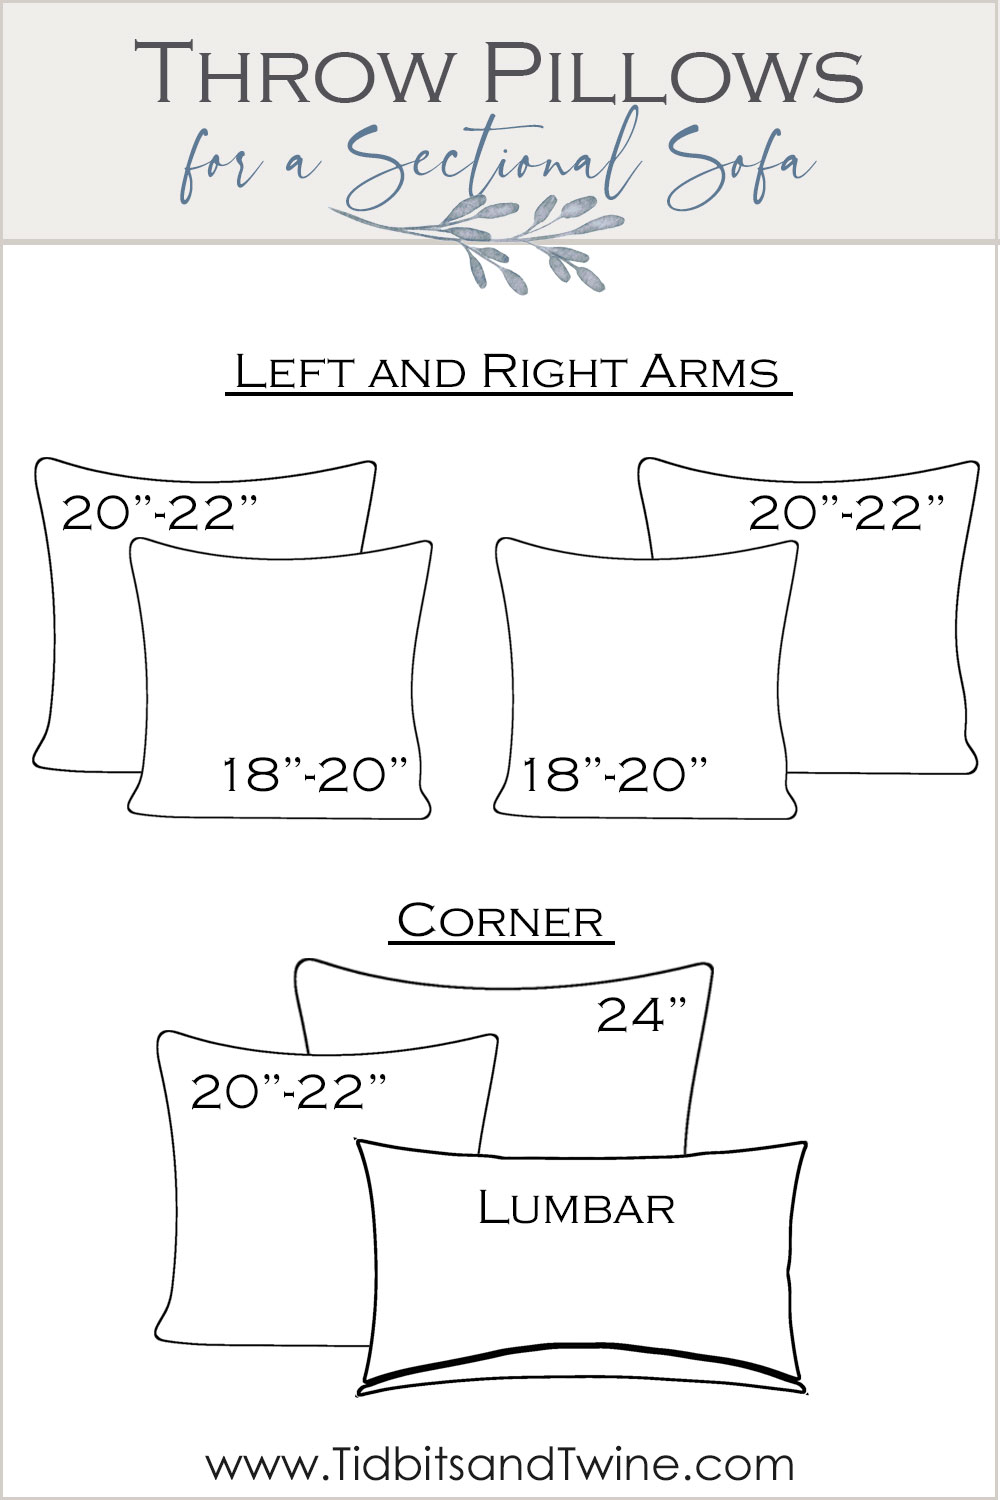 Pin on Pillow Info Guides